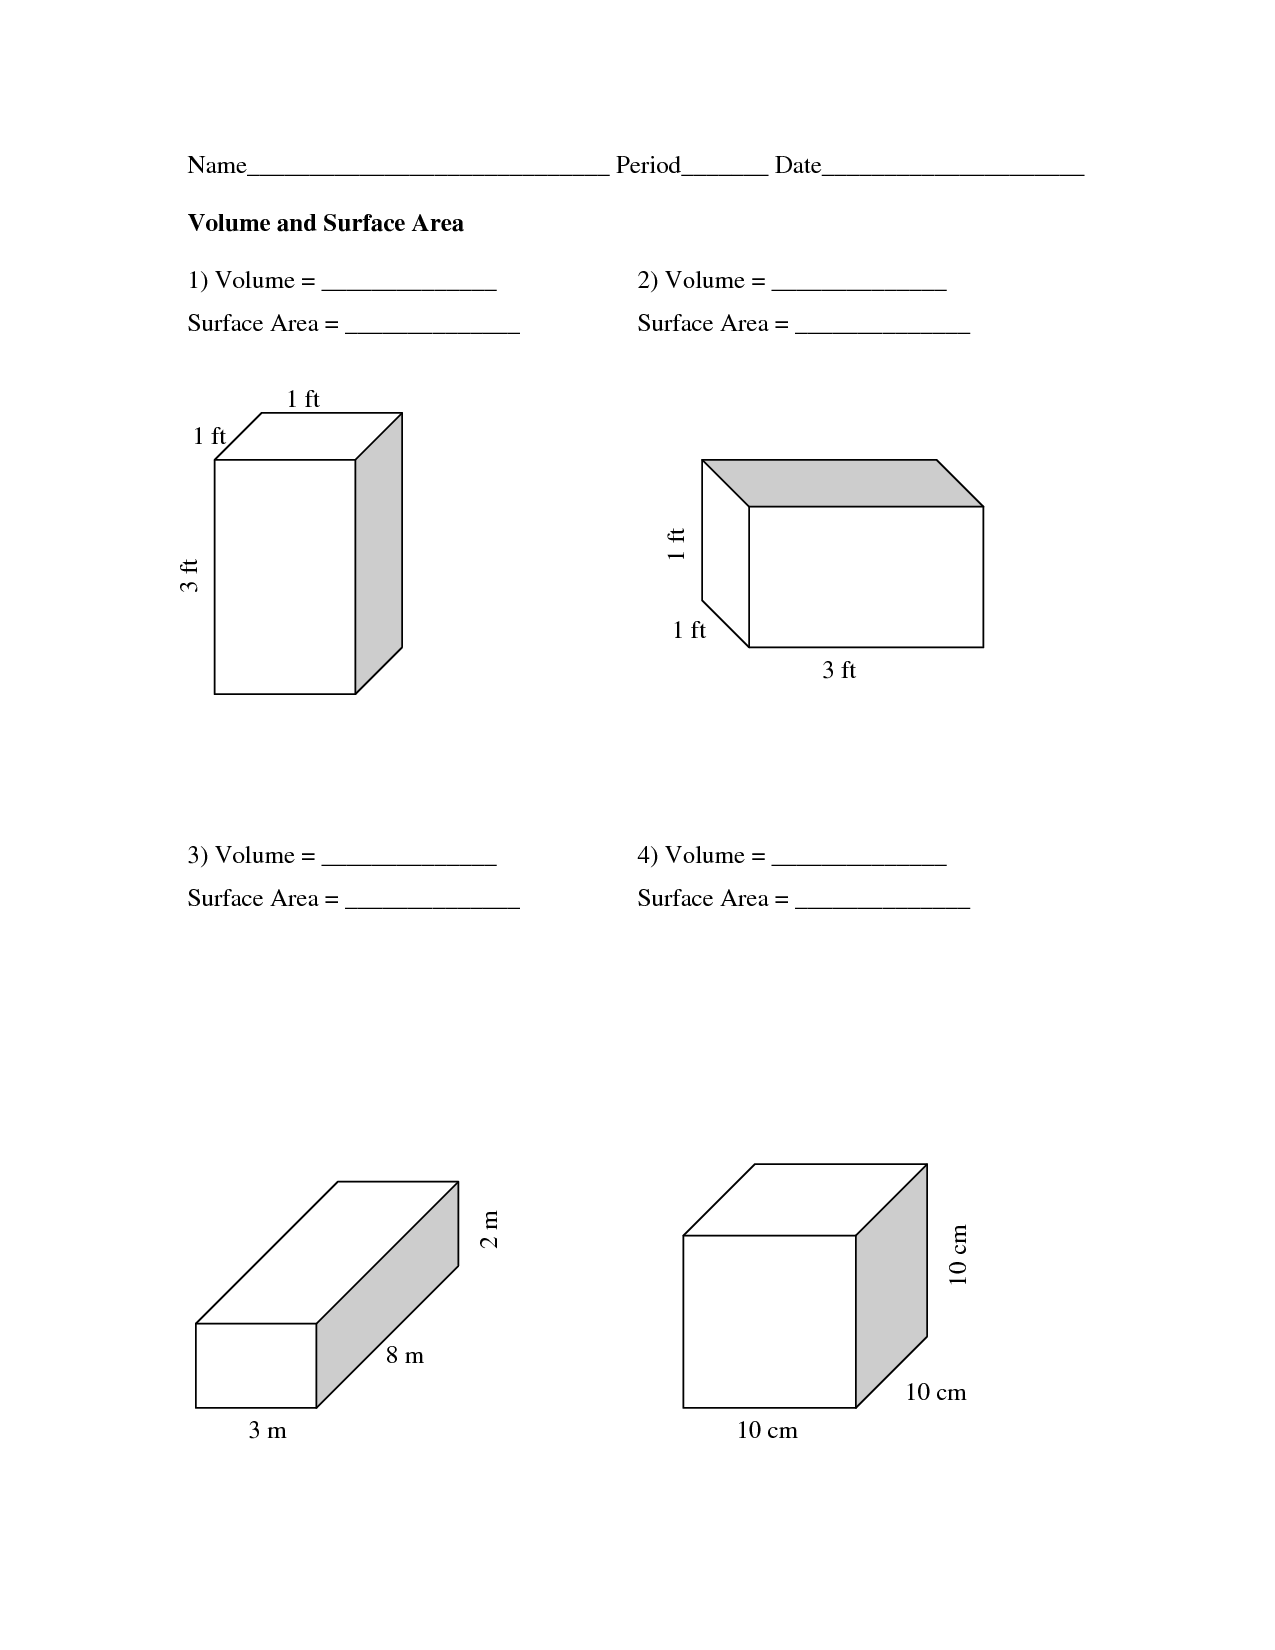 11-best-images-of-surface-area-rectangular-prism-net-worksheet-triangular-prism-surface-area